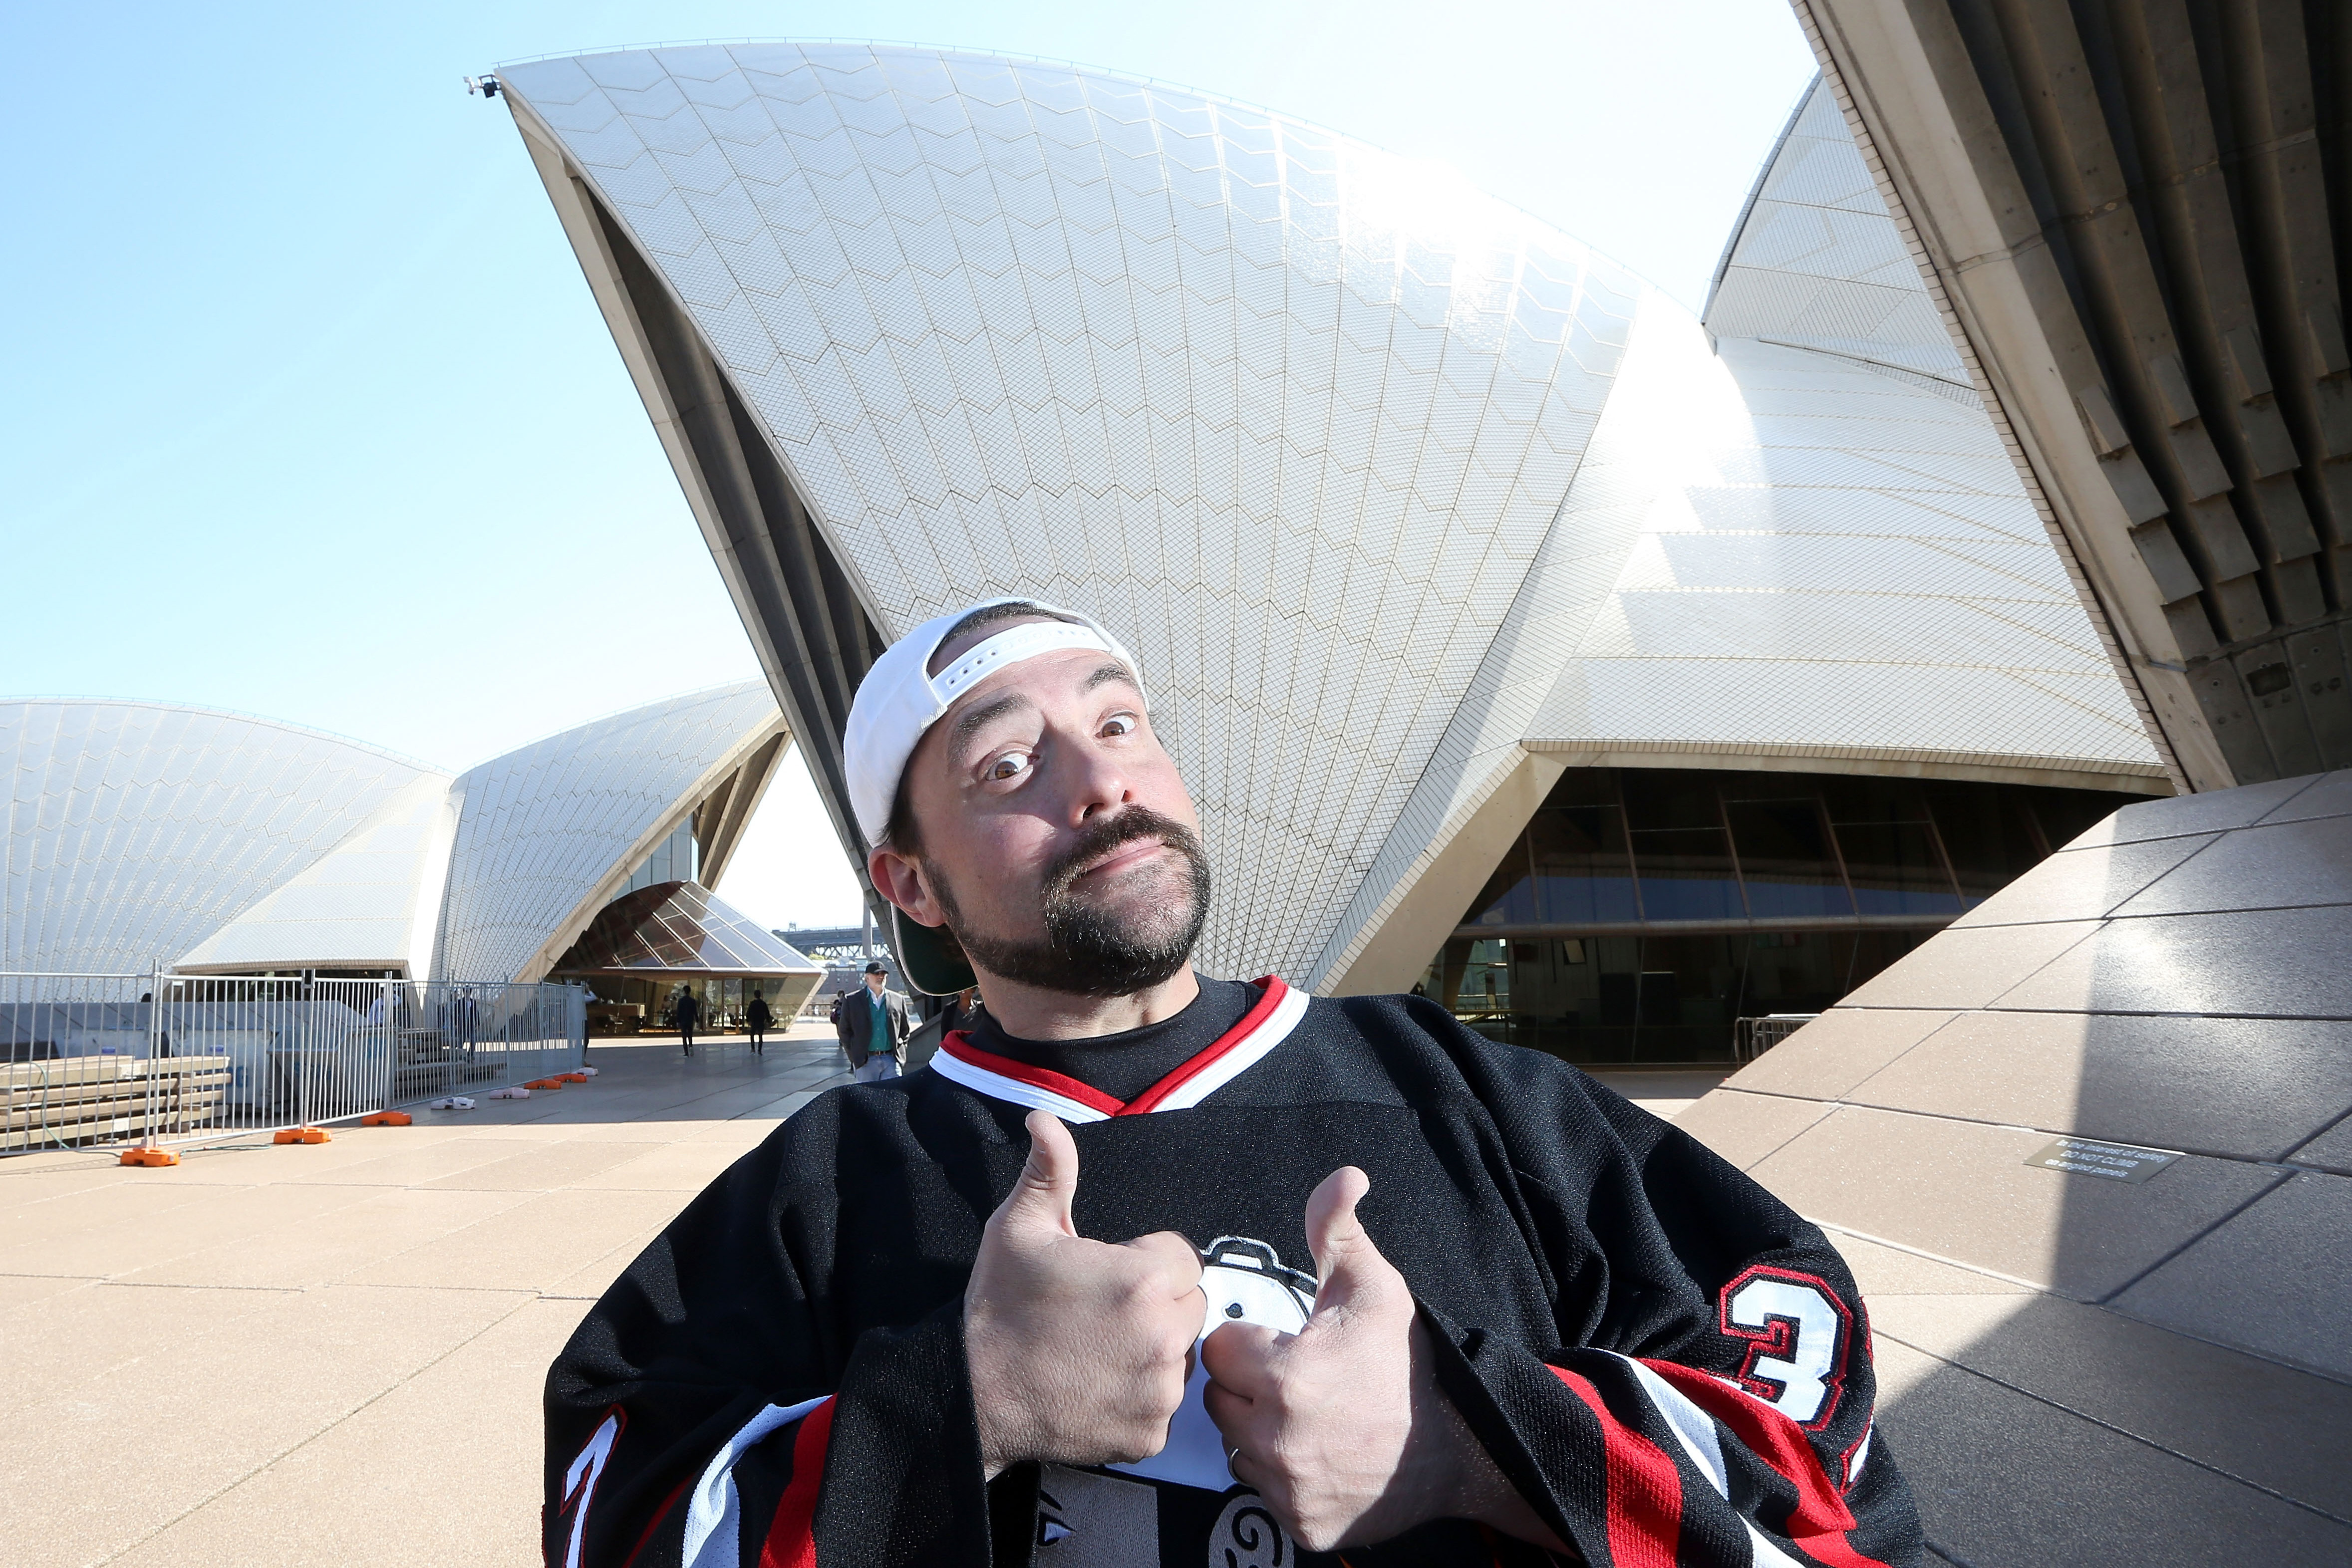 Kevin Smith Suffers "Massive" Heart Attack After Filming Comedy Special